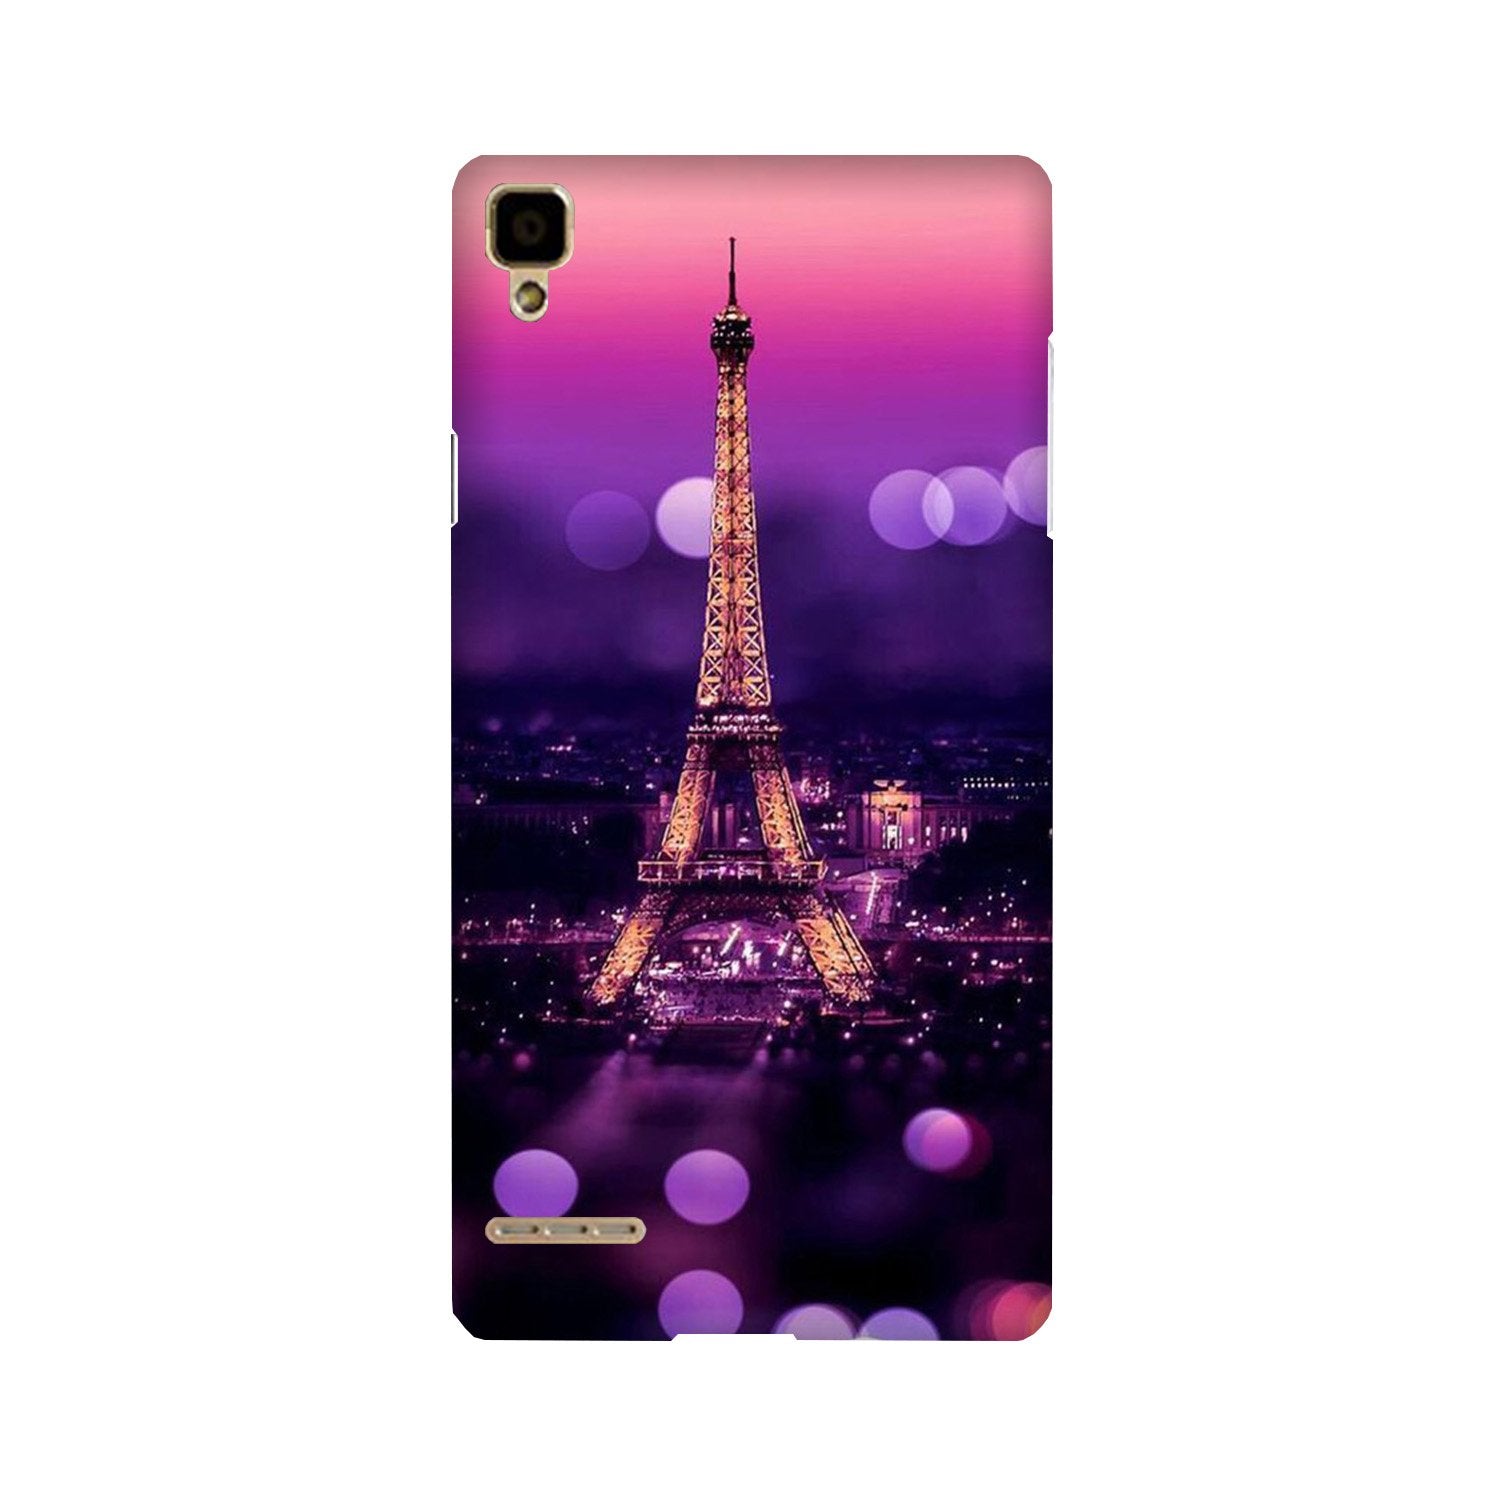 Eiffel Tower Case for Oppo F1